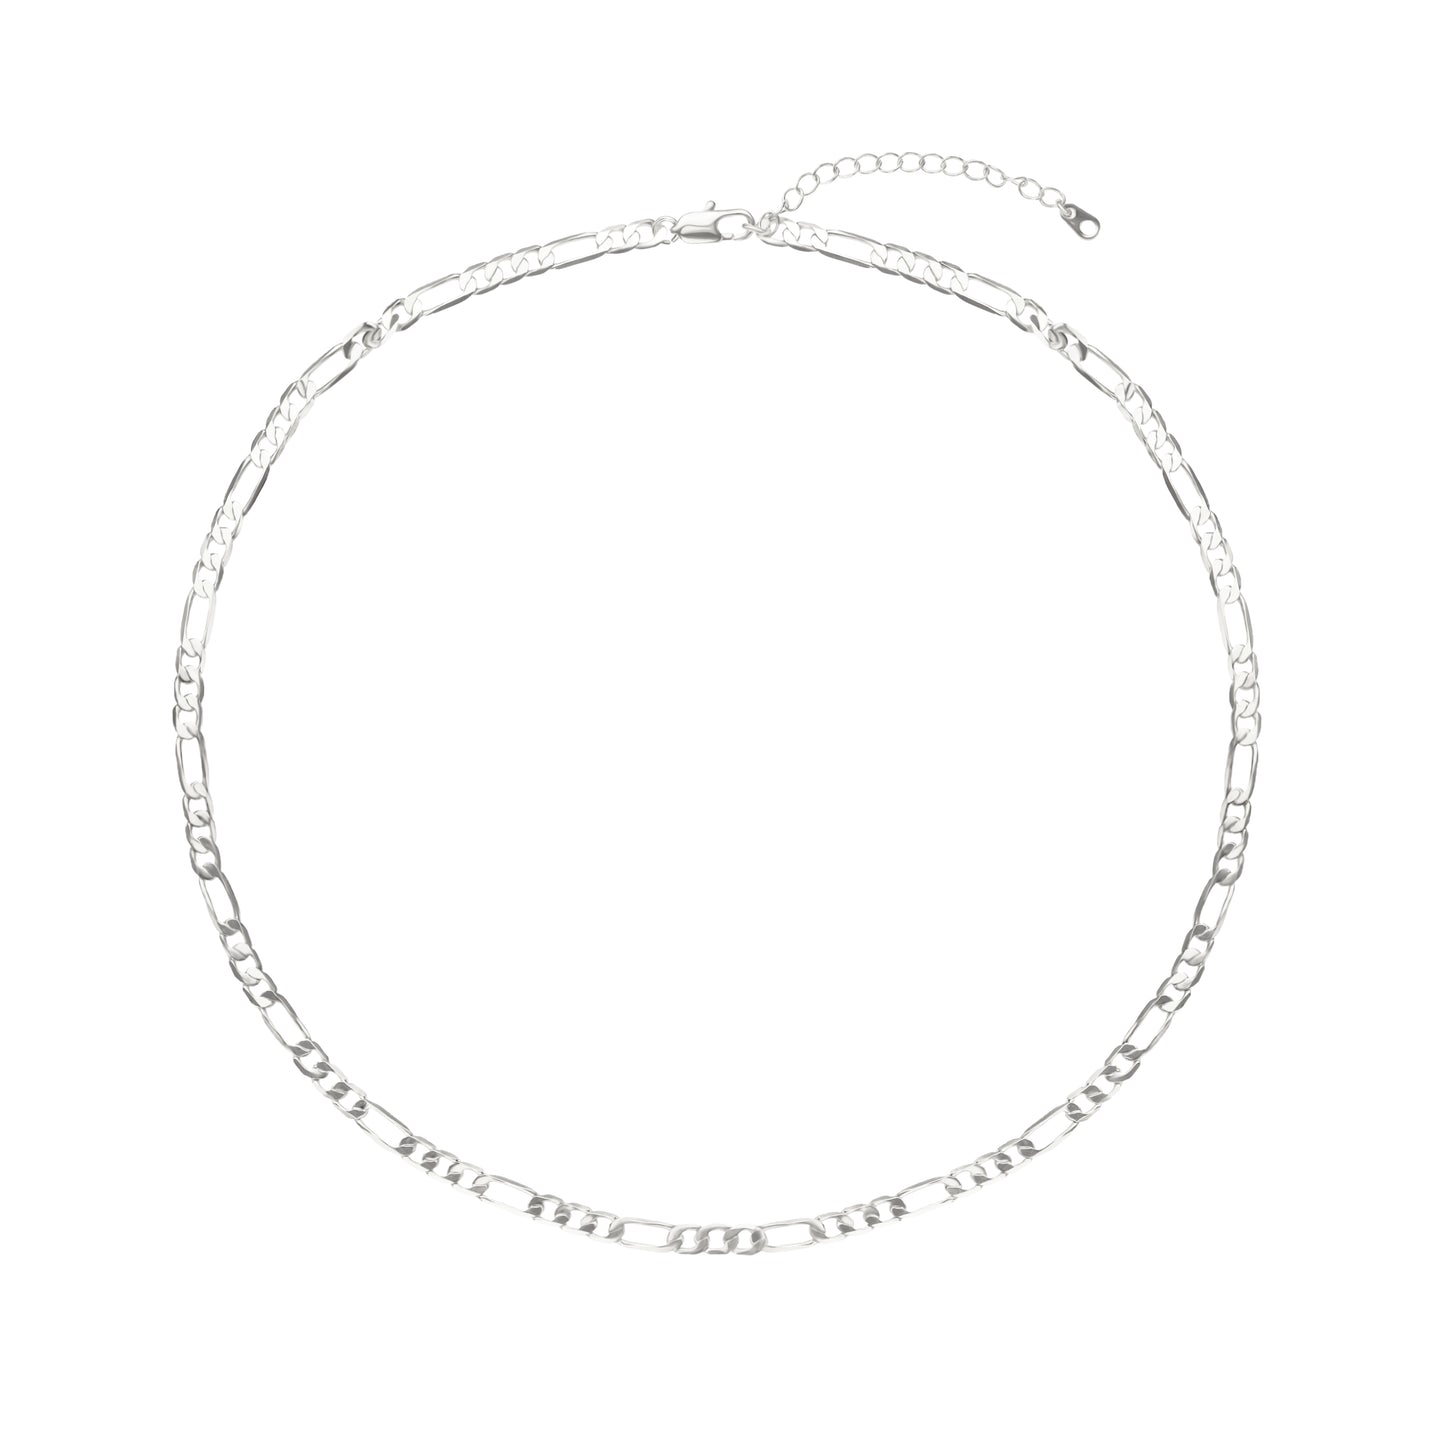 THICKER ITALIAN NECKLACE 4.5MM | White Rhodium Plated - DIY